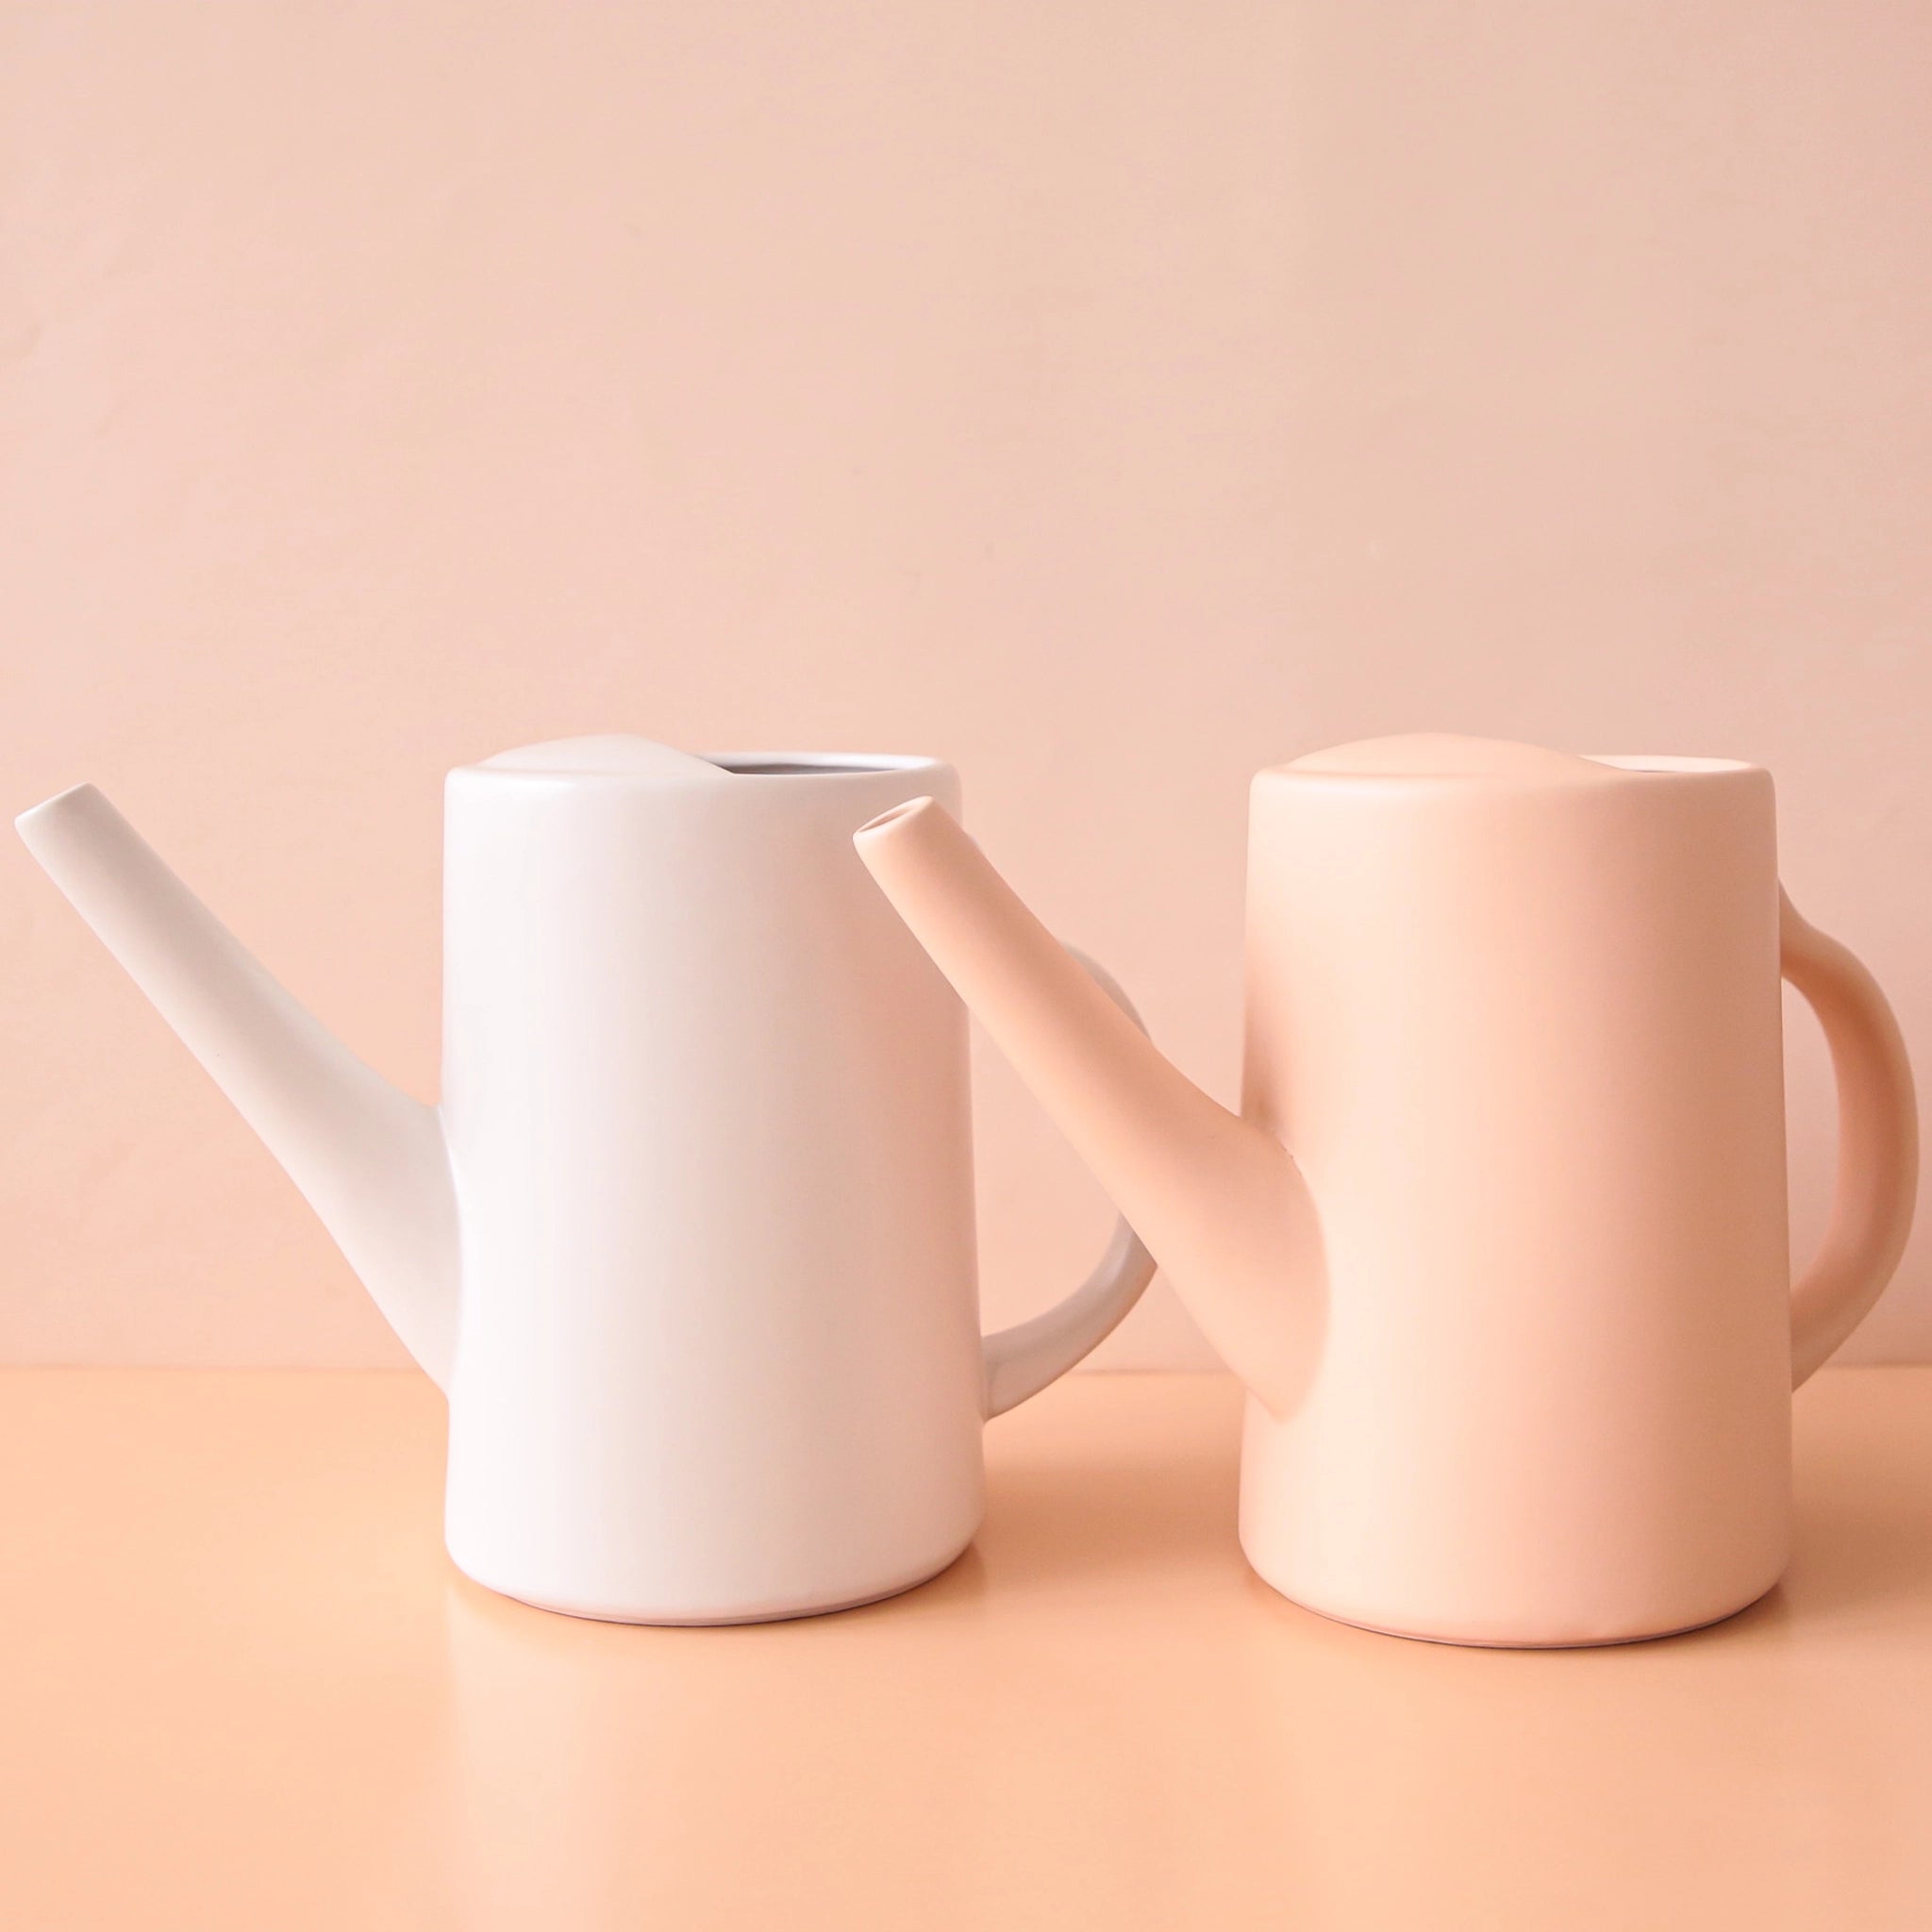 On a peachy background is two ceramic watering cans in a blush color and white. They have narrow spouts and curved handles. 